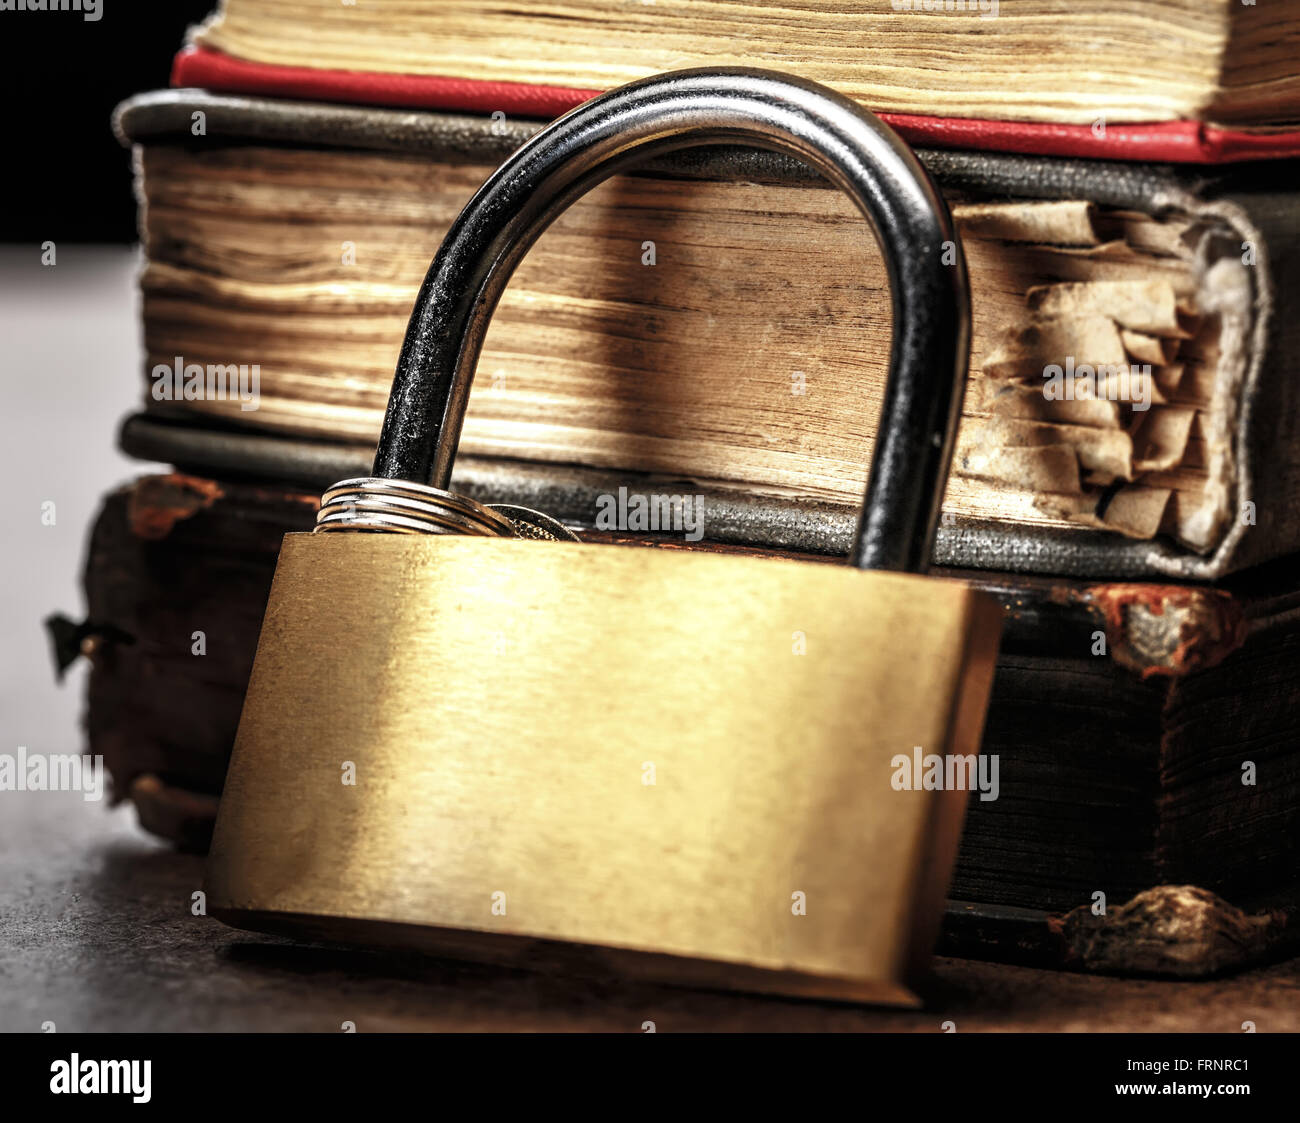 Key lock against the background of books Stock Photo